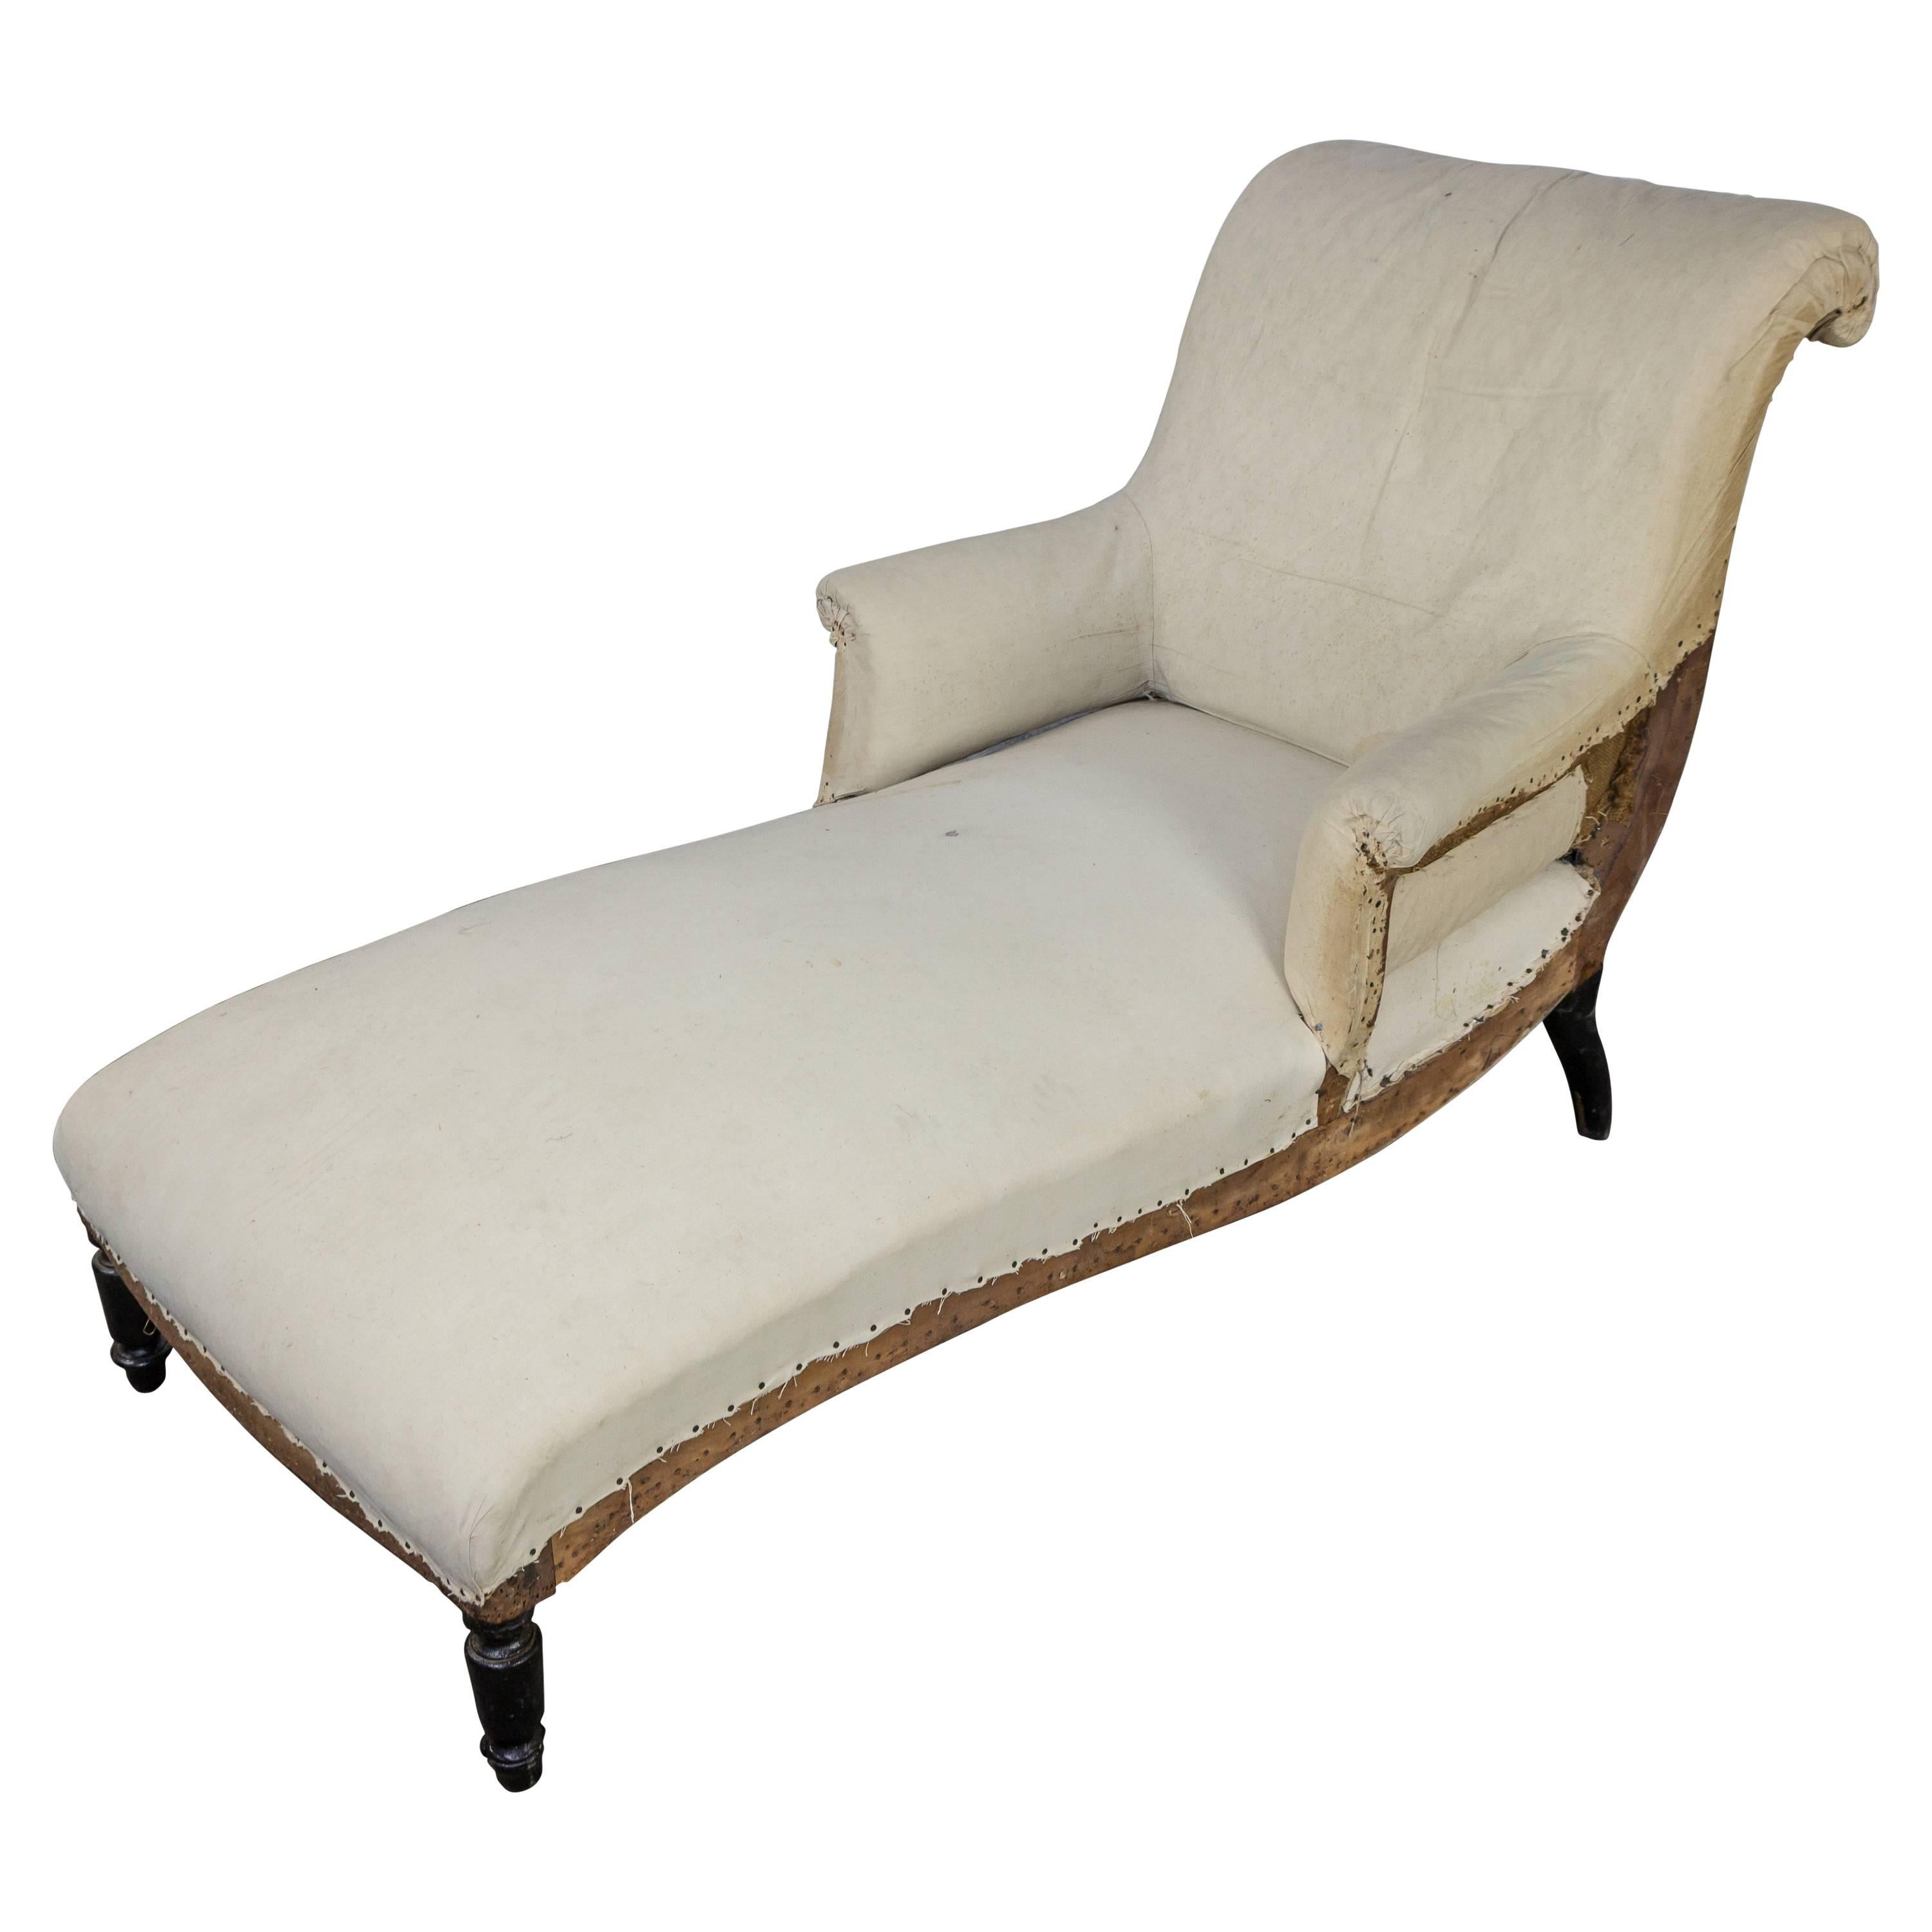 French 19th Century Scrolled Back Chaise Longue in Muslin